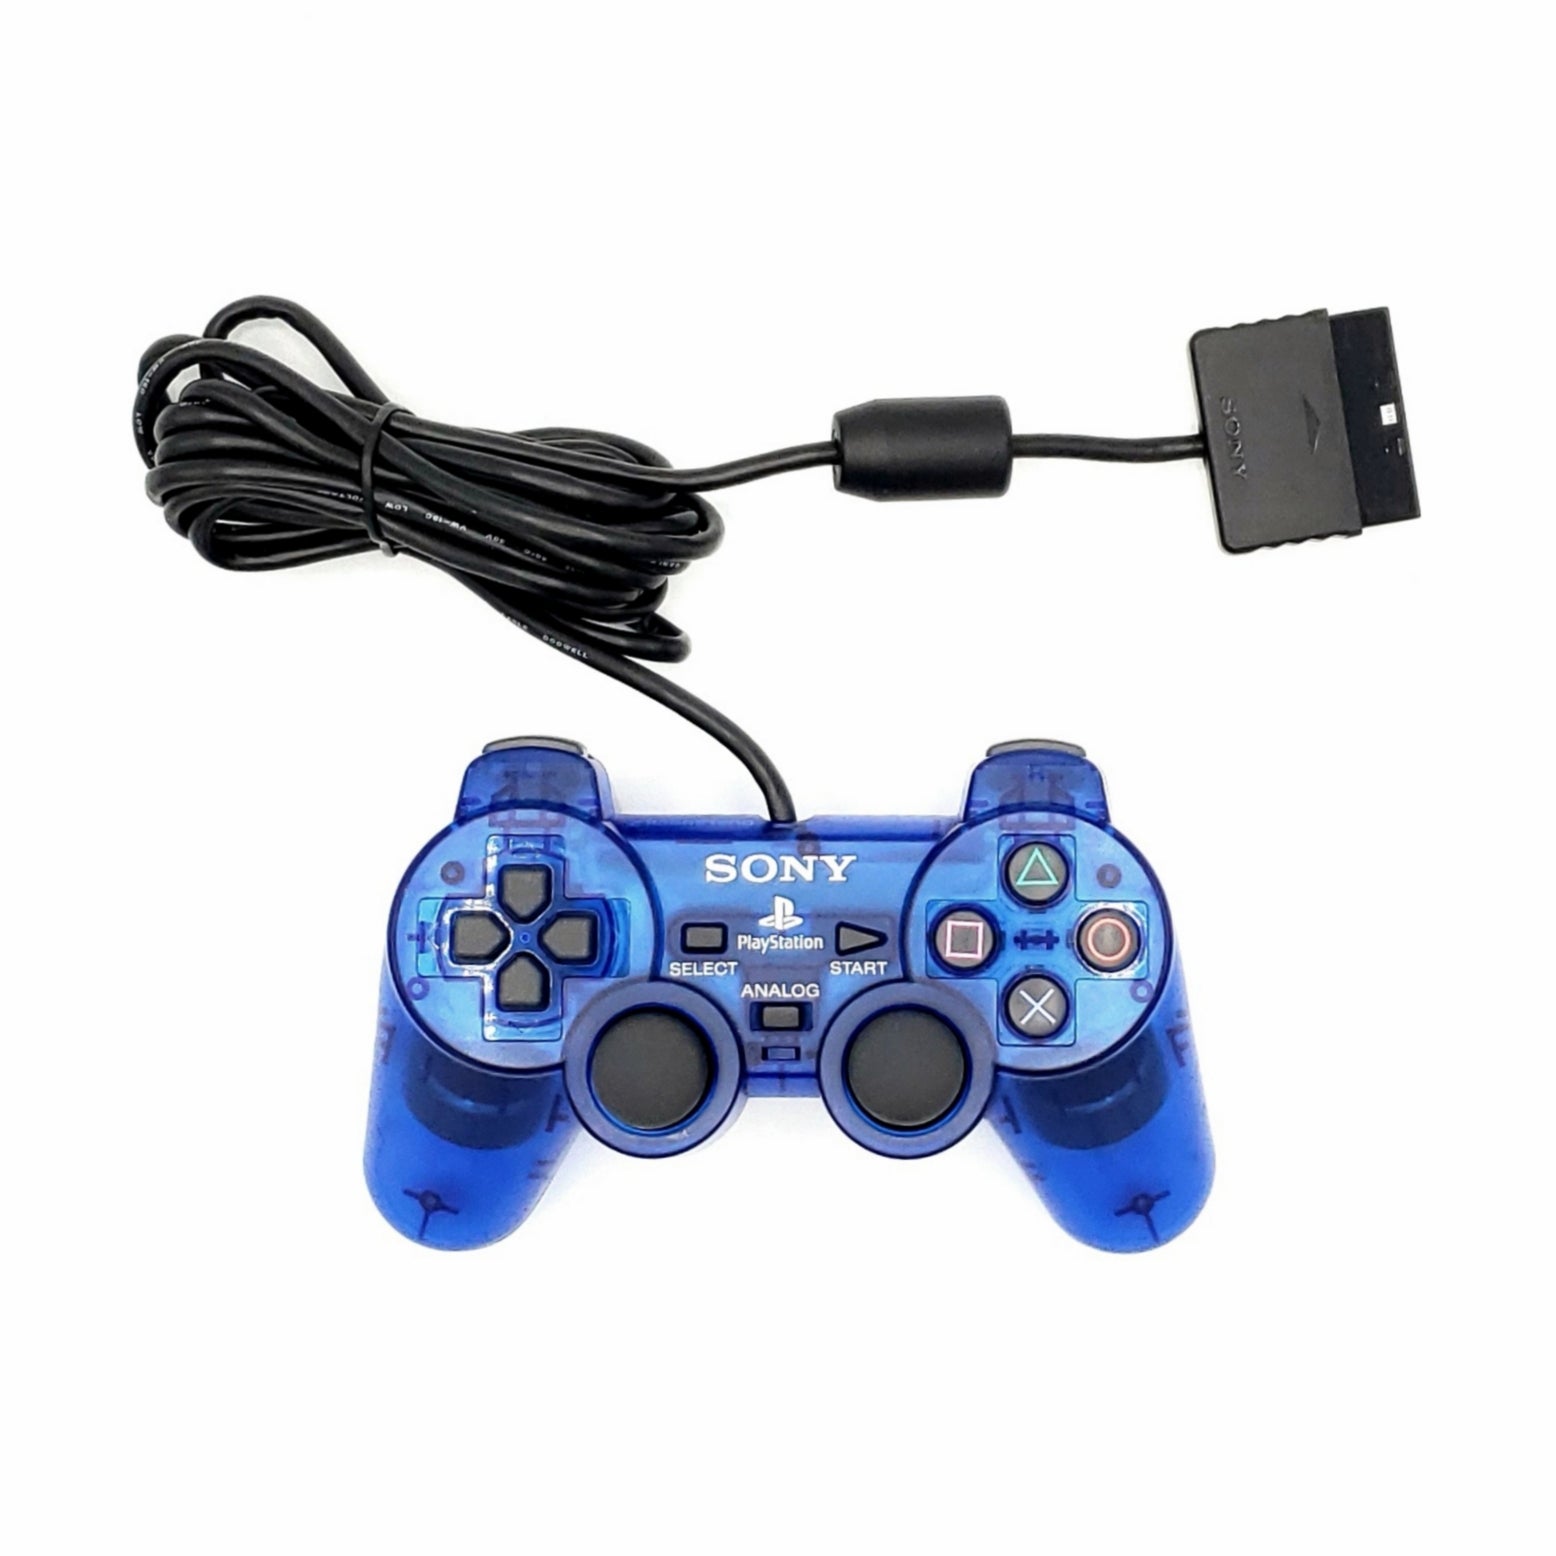 Sony PlayStation 2 DualShock 2 Analog Controller - Blue - YourGamingShop.com - Buy, Sell, Trade Video Games Online. 120 Day Warranty. Satisfaction Guaranteed.